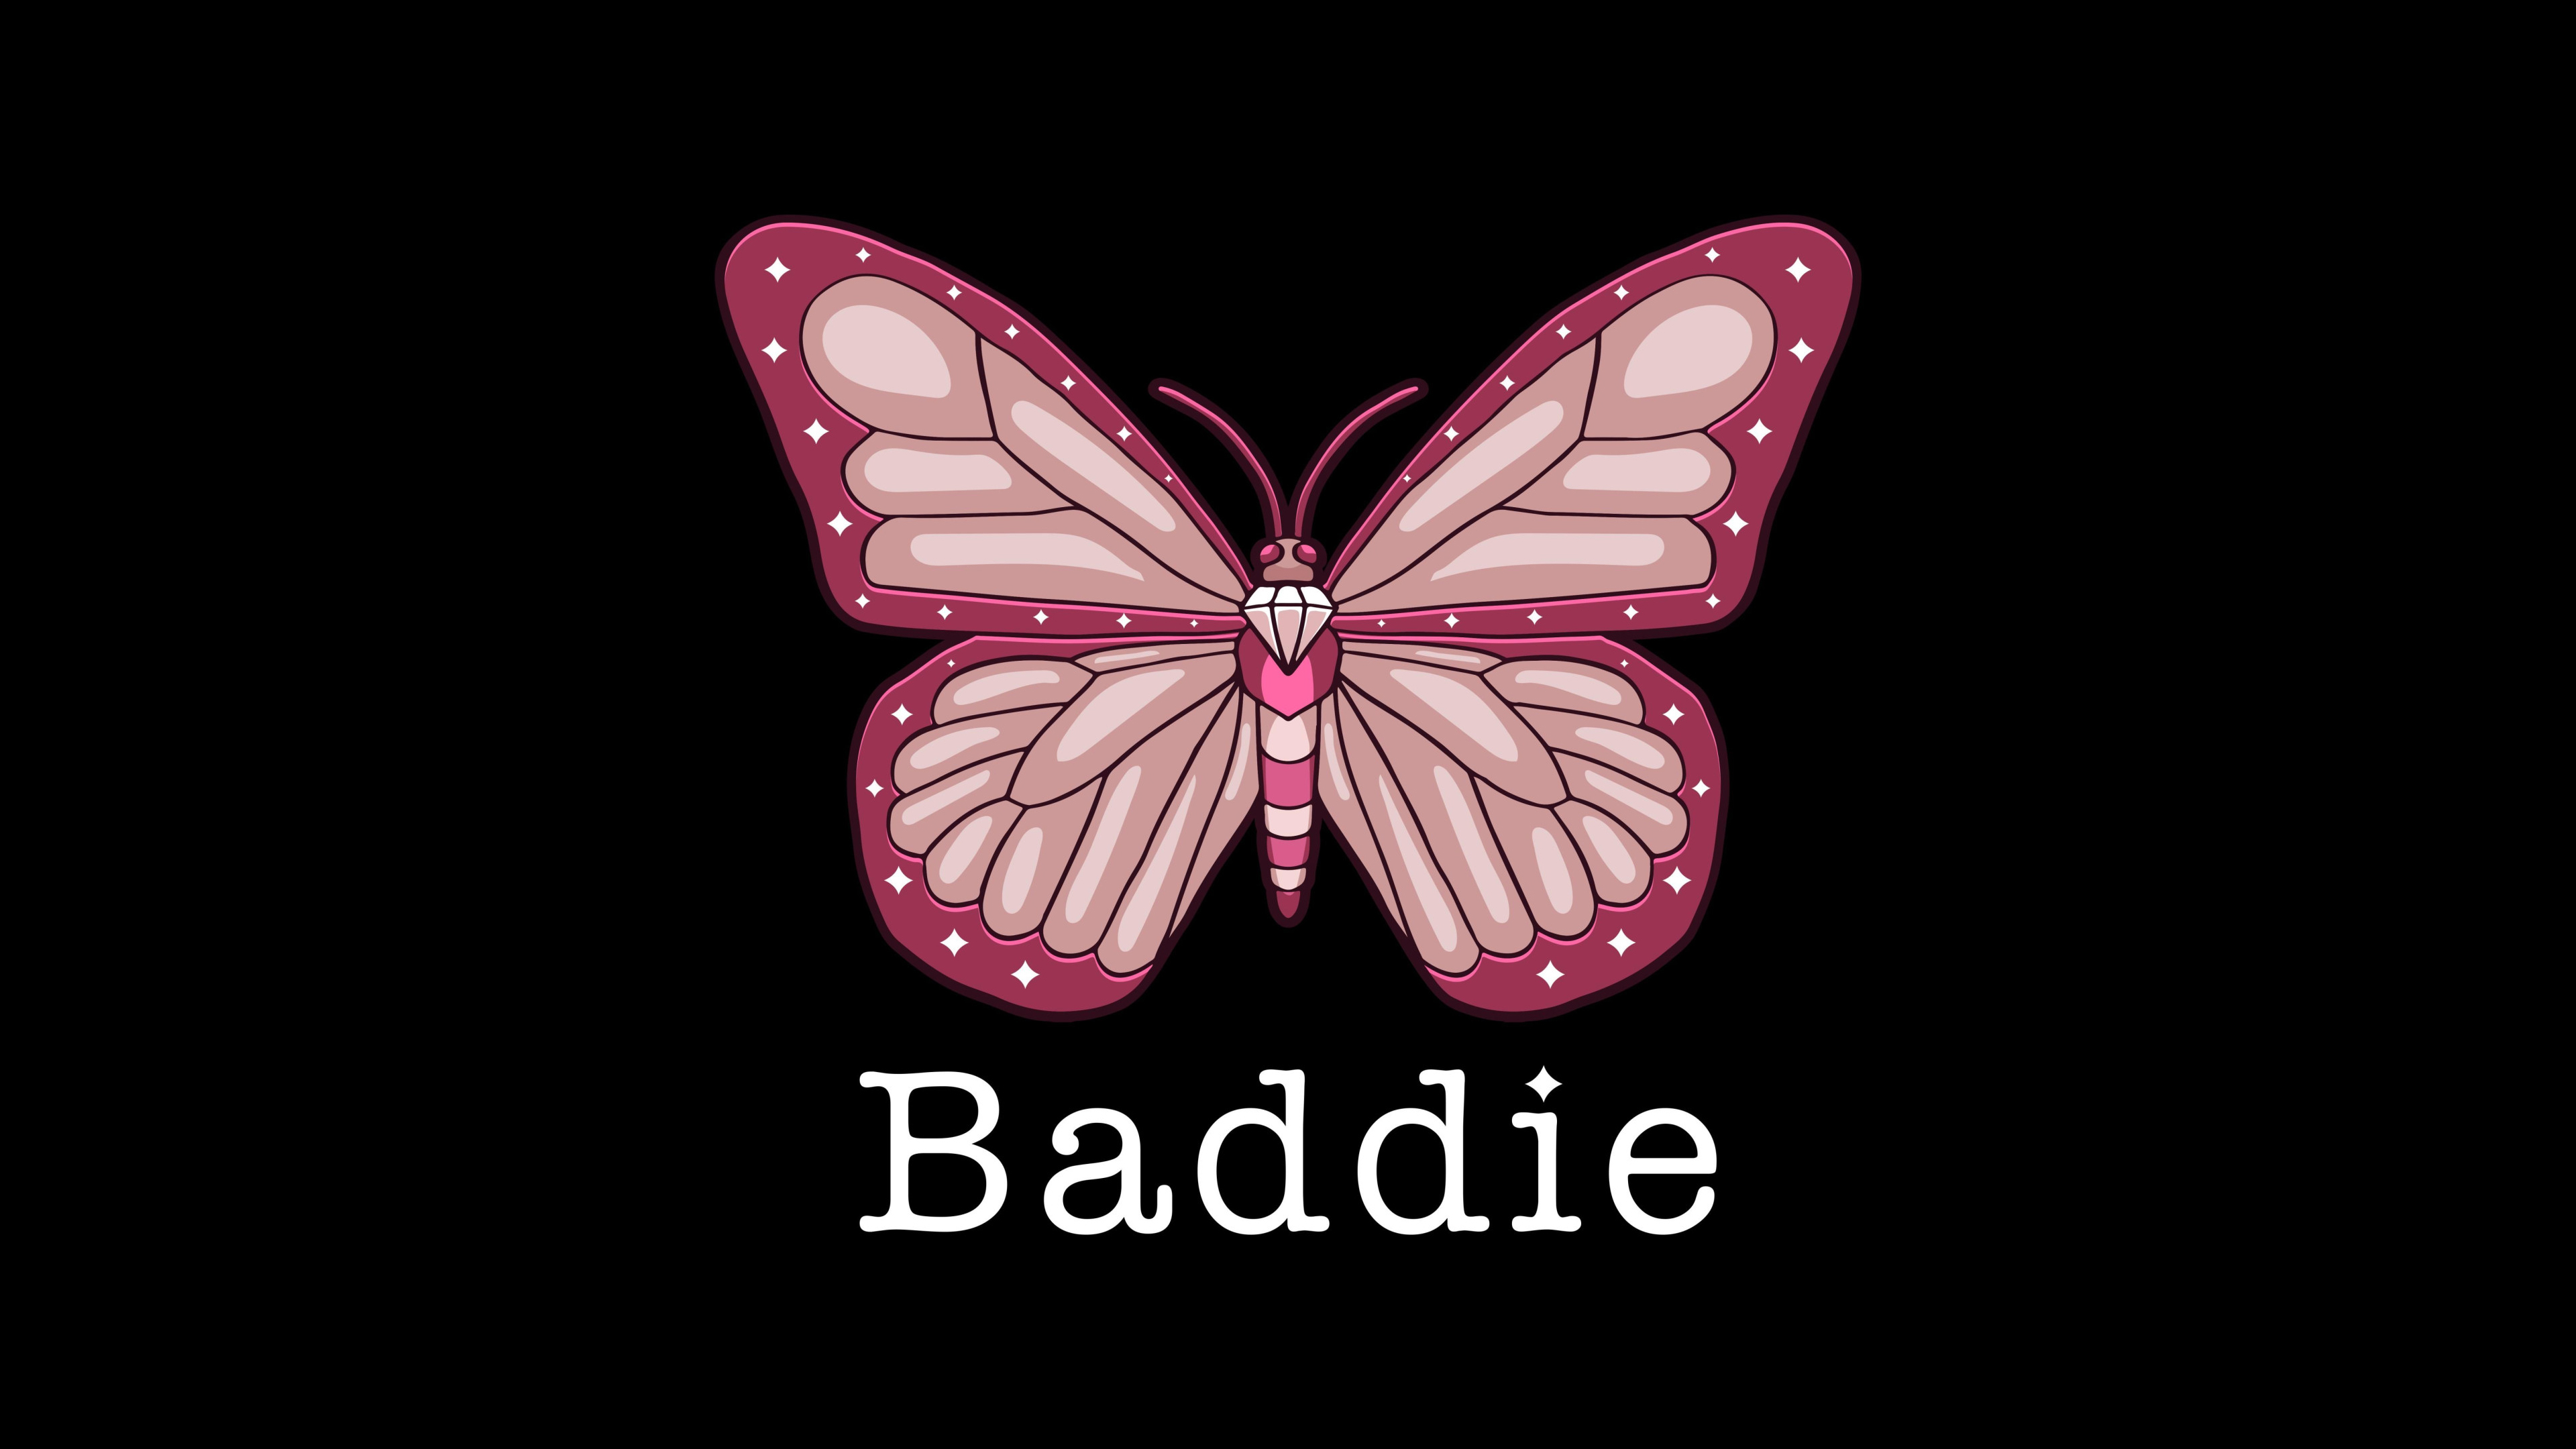 Baddie HD Wallpapers 1000 Free Baddie Wallpaper Images For All Devices